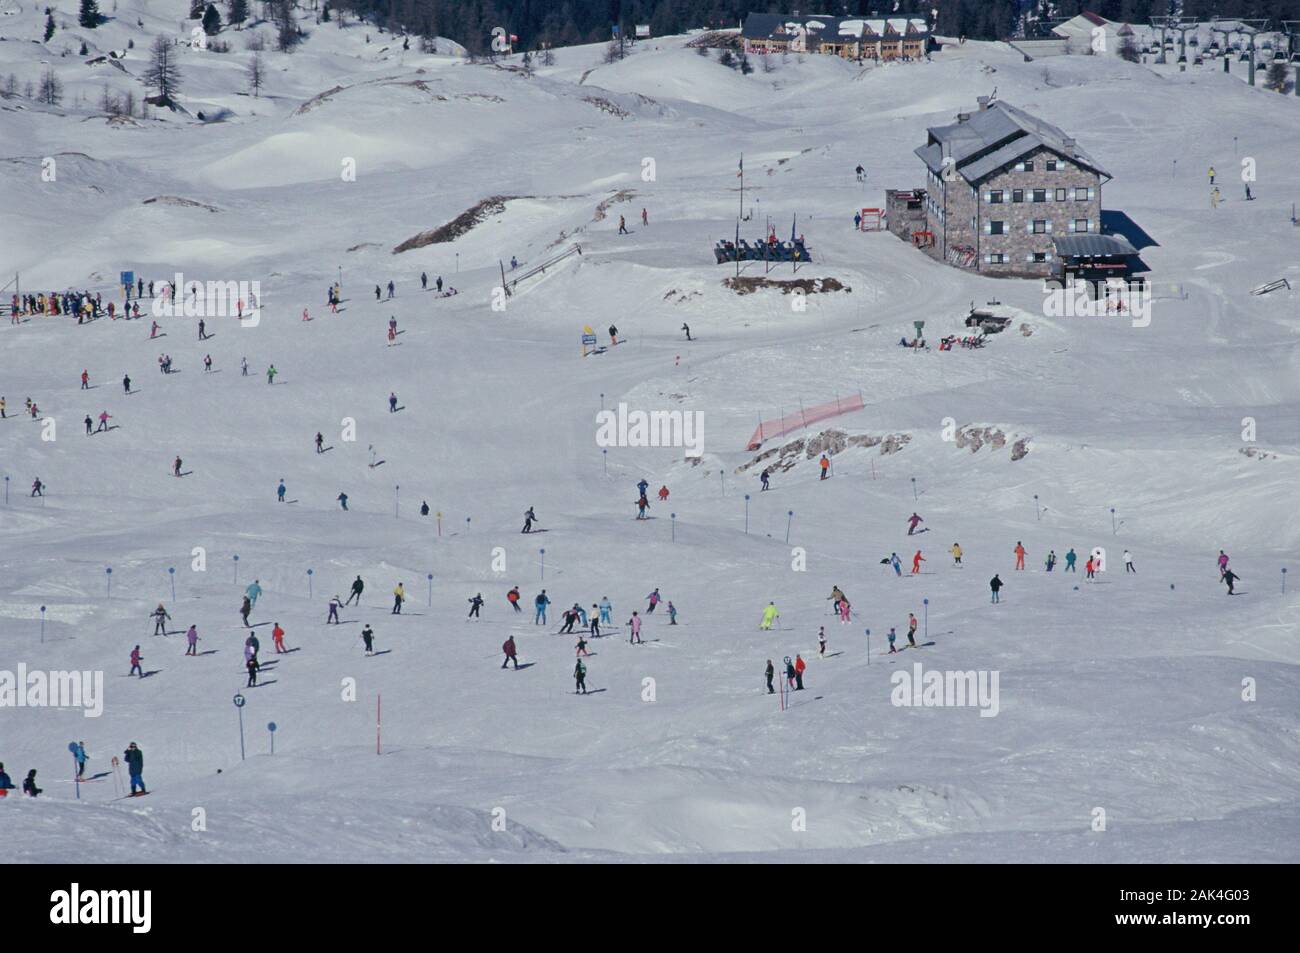 Skiers playing ski on a ski run in the skiing area of Madonna di Campiglio, a popular holiday destination in the Northern Italian alpine region of the Stock Photo